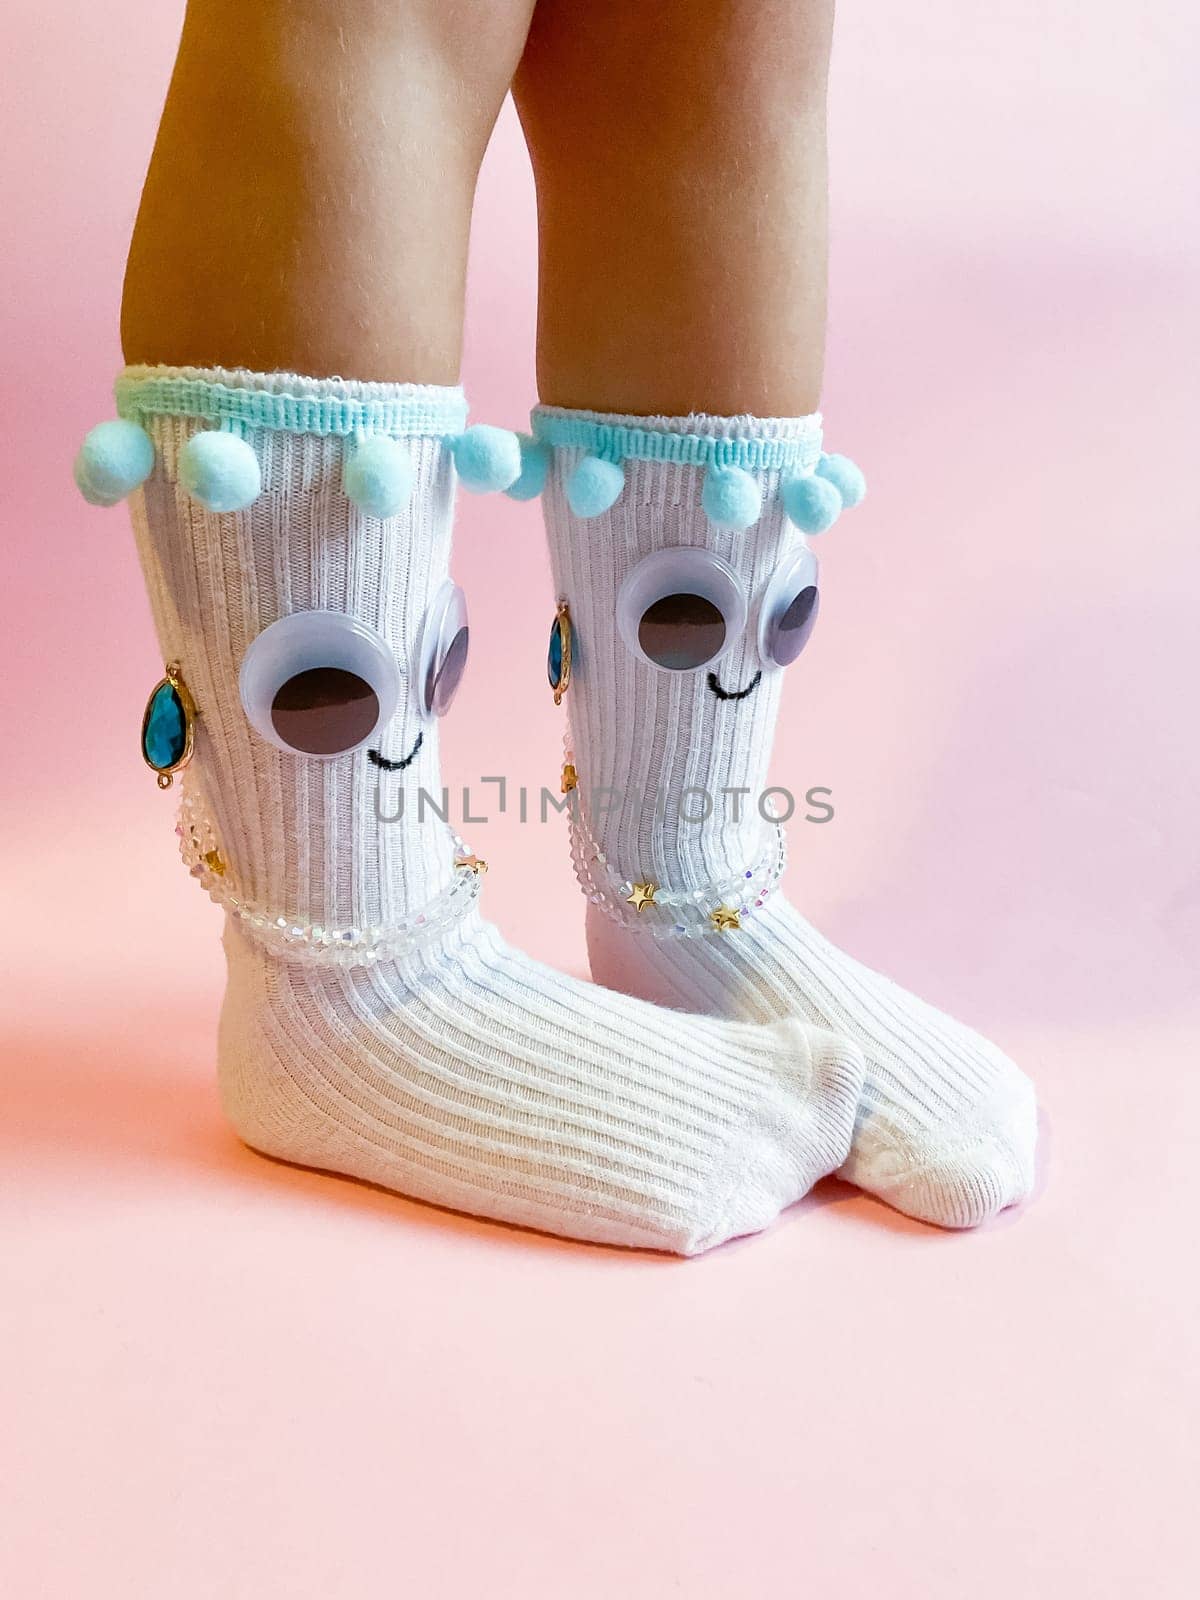 Baby socks with eyes and a smile on a pink background. Cute funny socks with eyes and decorations on the feet of a child.